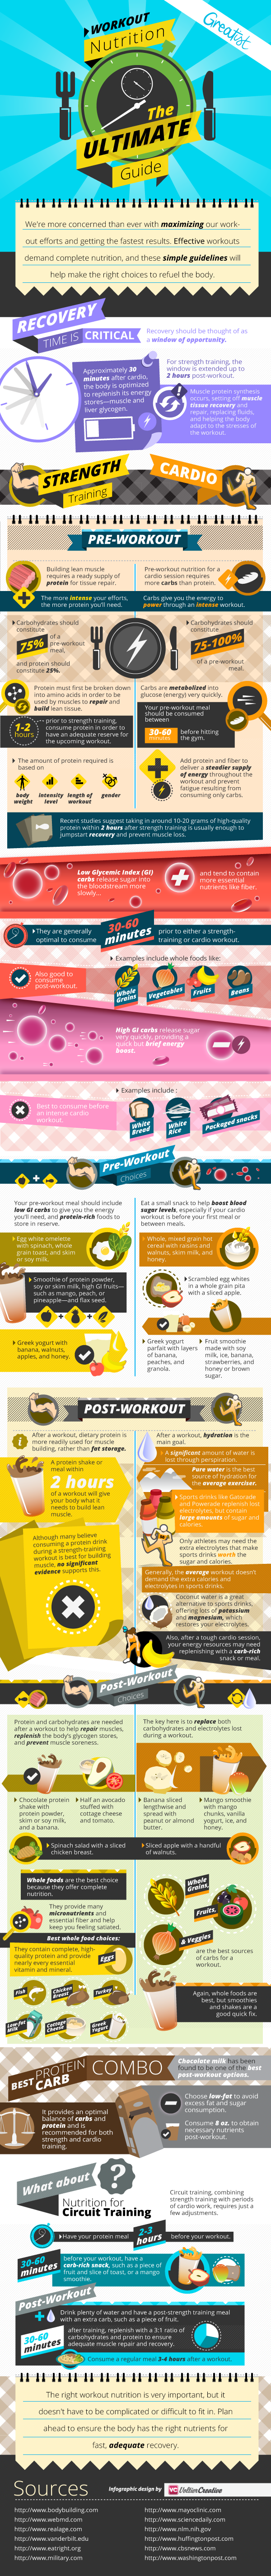 The Complete Guide to Workout Nutriton [Infographic]